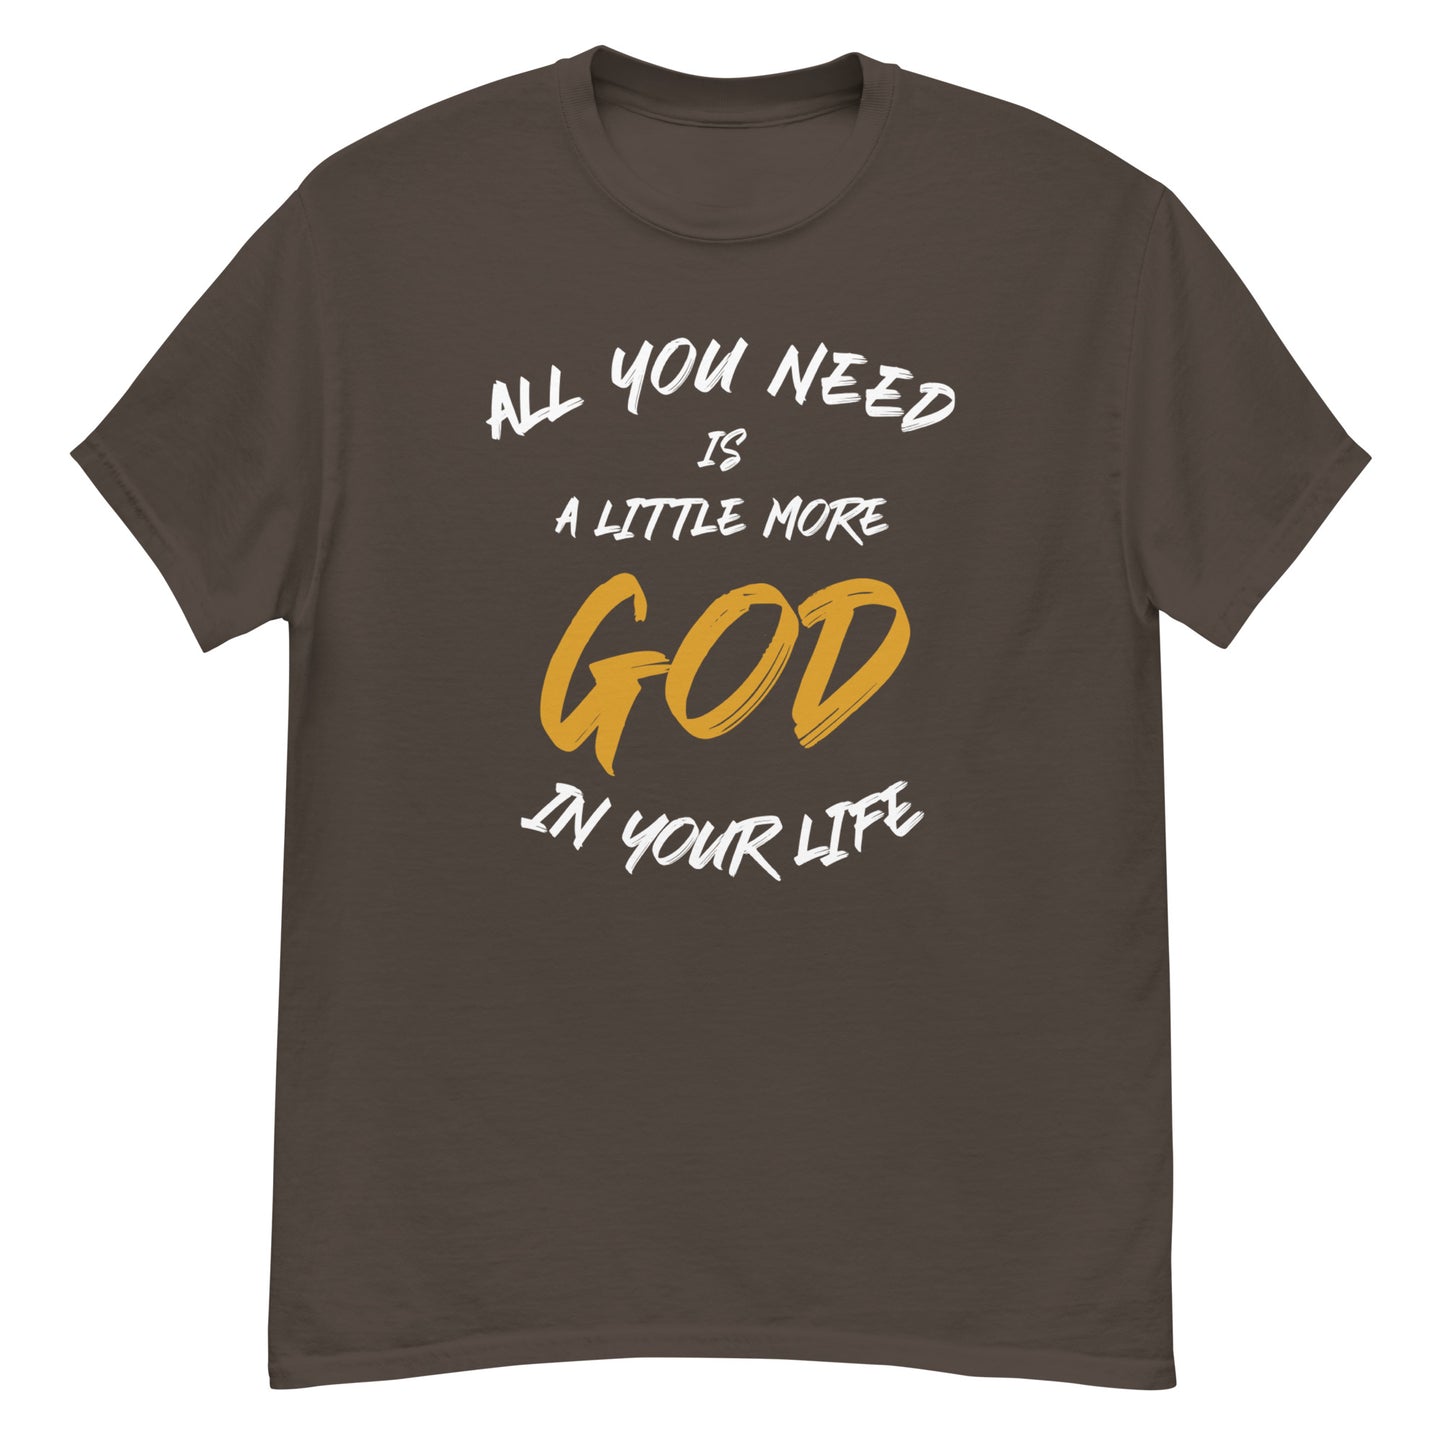 All you need is a little more God in your life classic tee (white lettering)